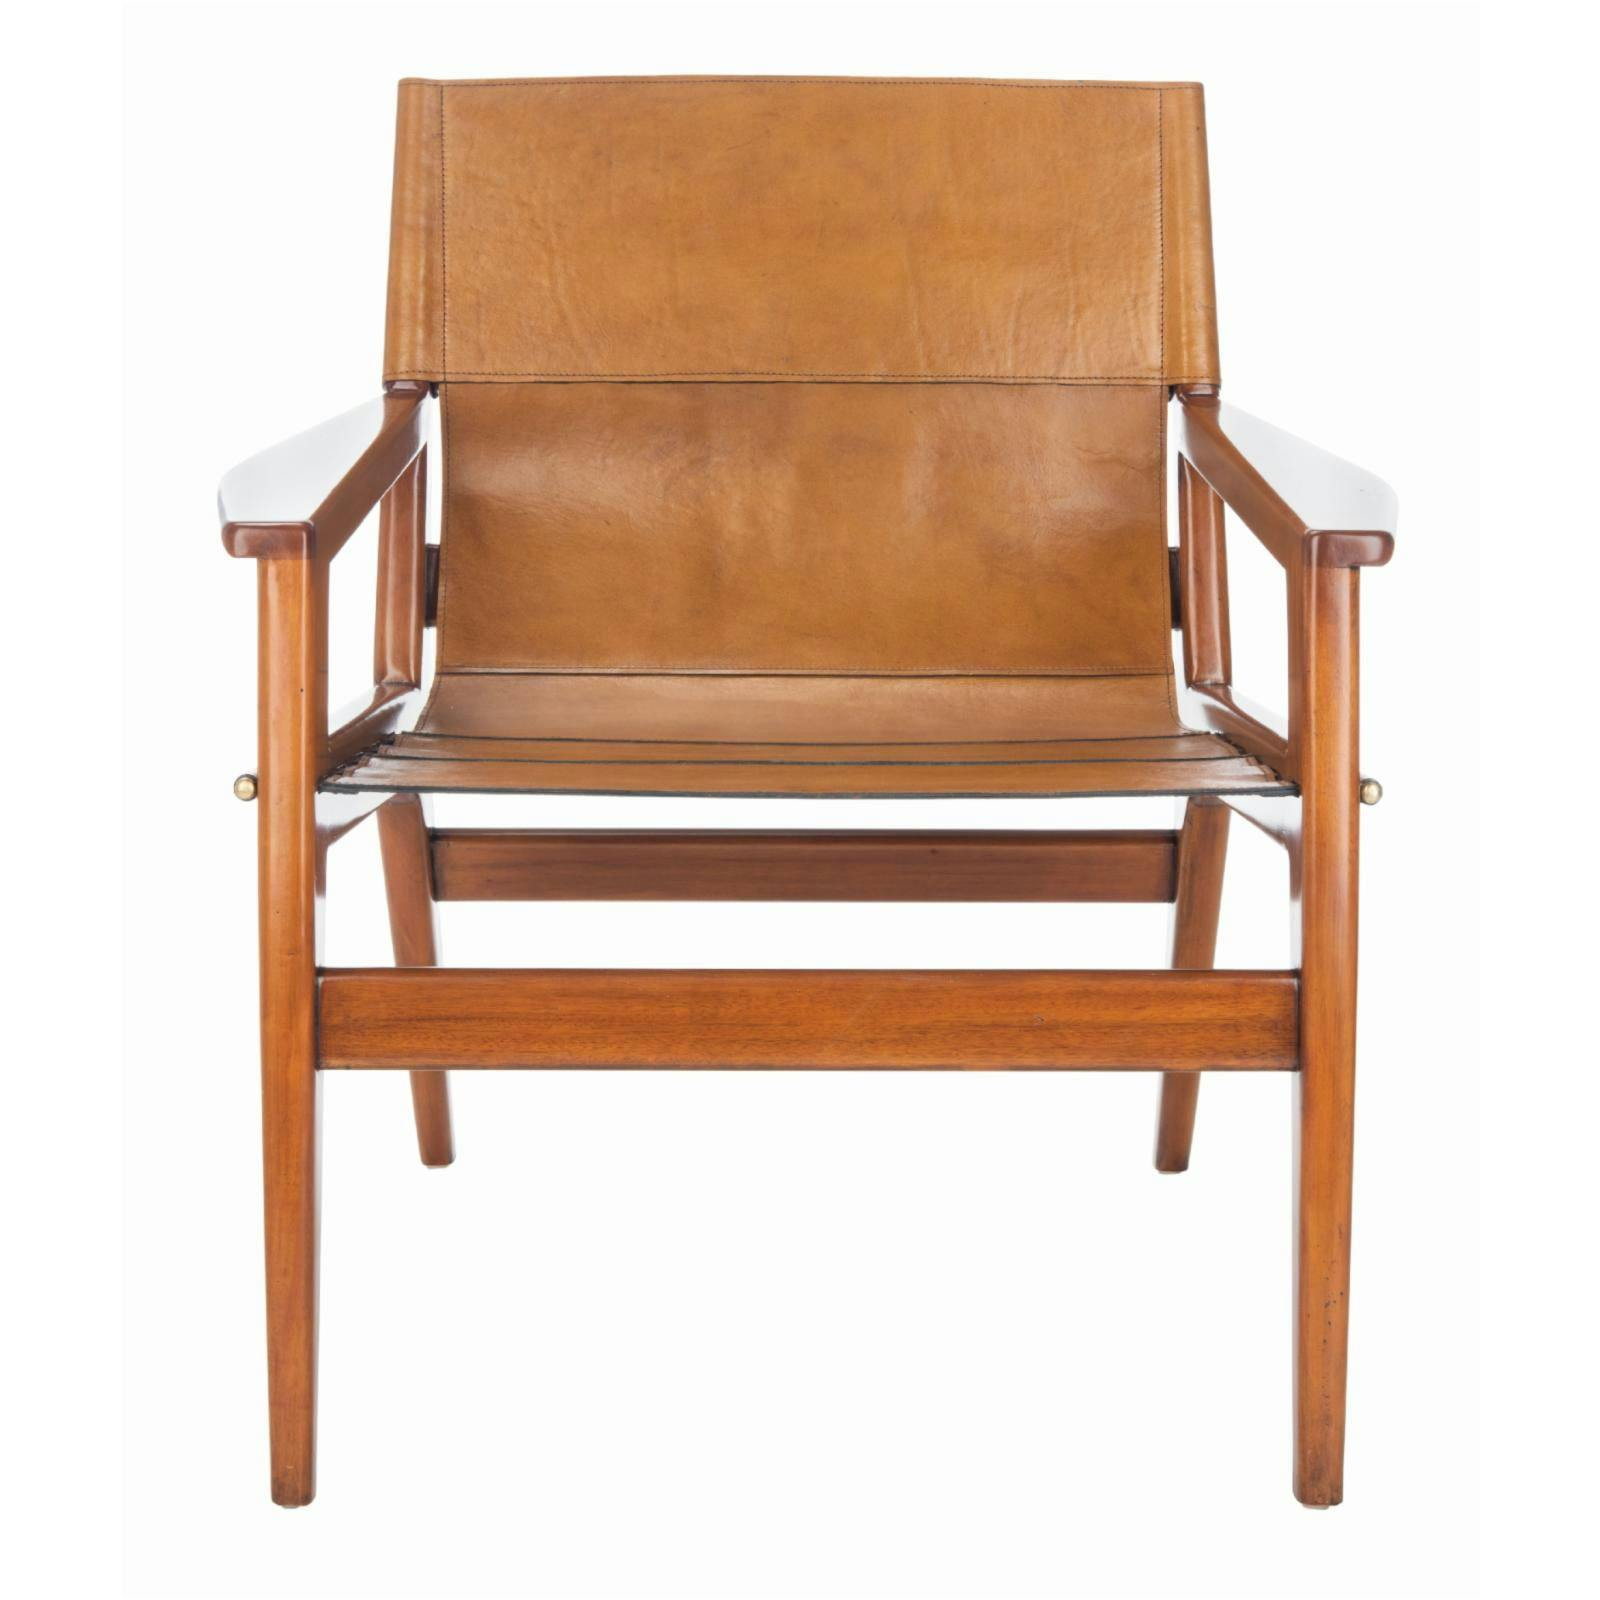 Culkin Modern Brown Leather Sling Armchair with Mahogany Frame